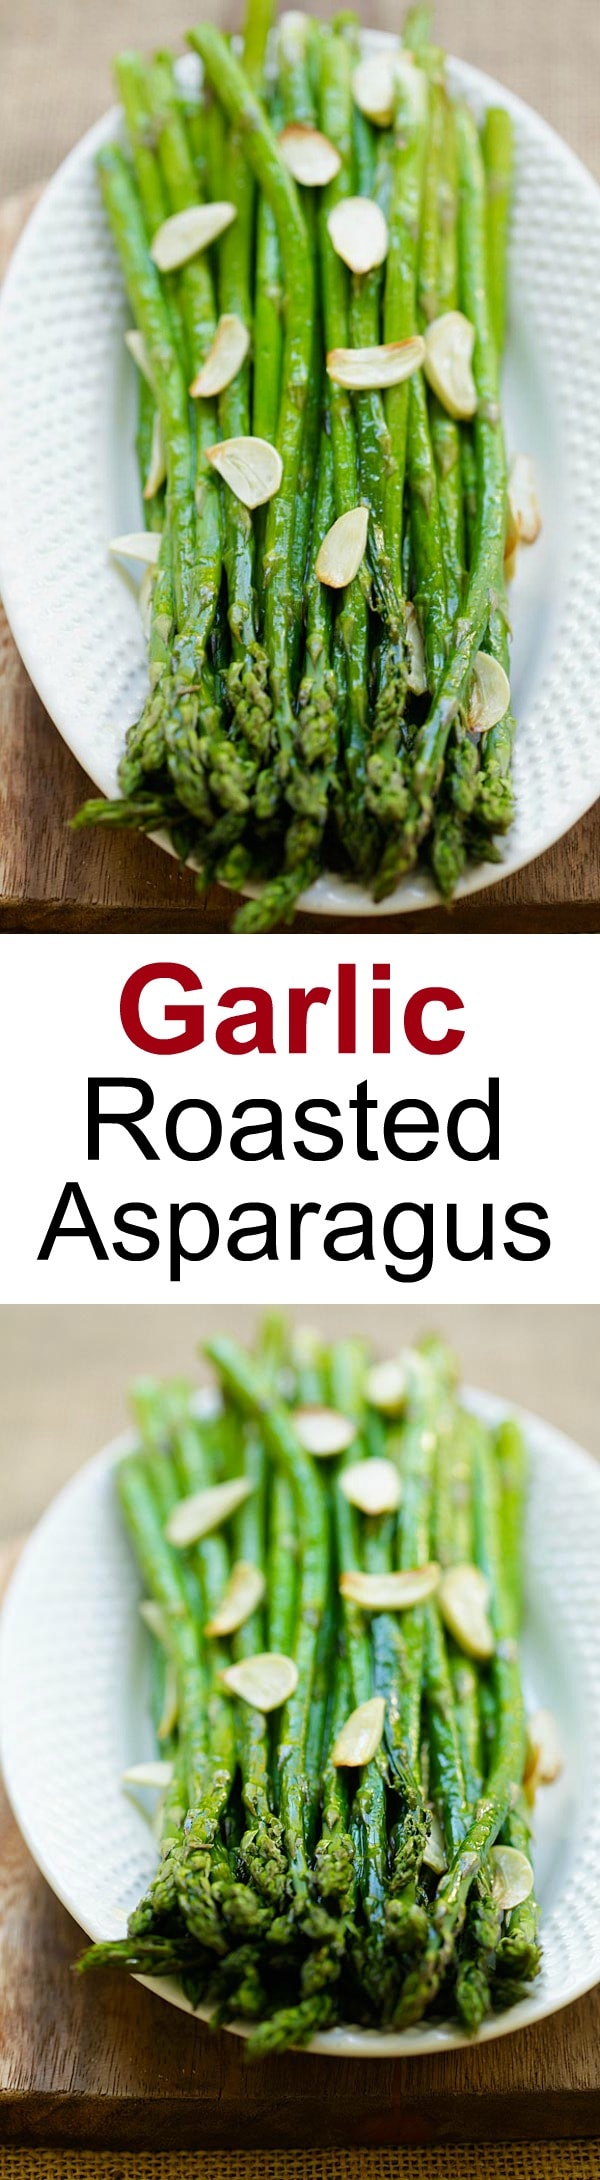 Garlic Roasted Asparagus – healthy oven-baked asparagus with garlic. Four ingredients and takes only 12 mins to make this quick and easy side dish | rasamalaysia.com